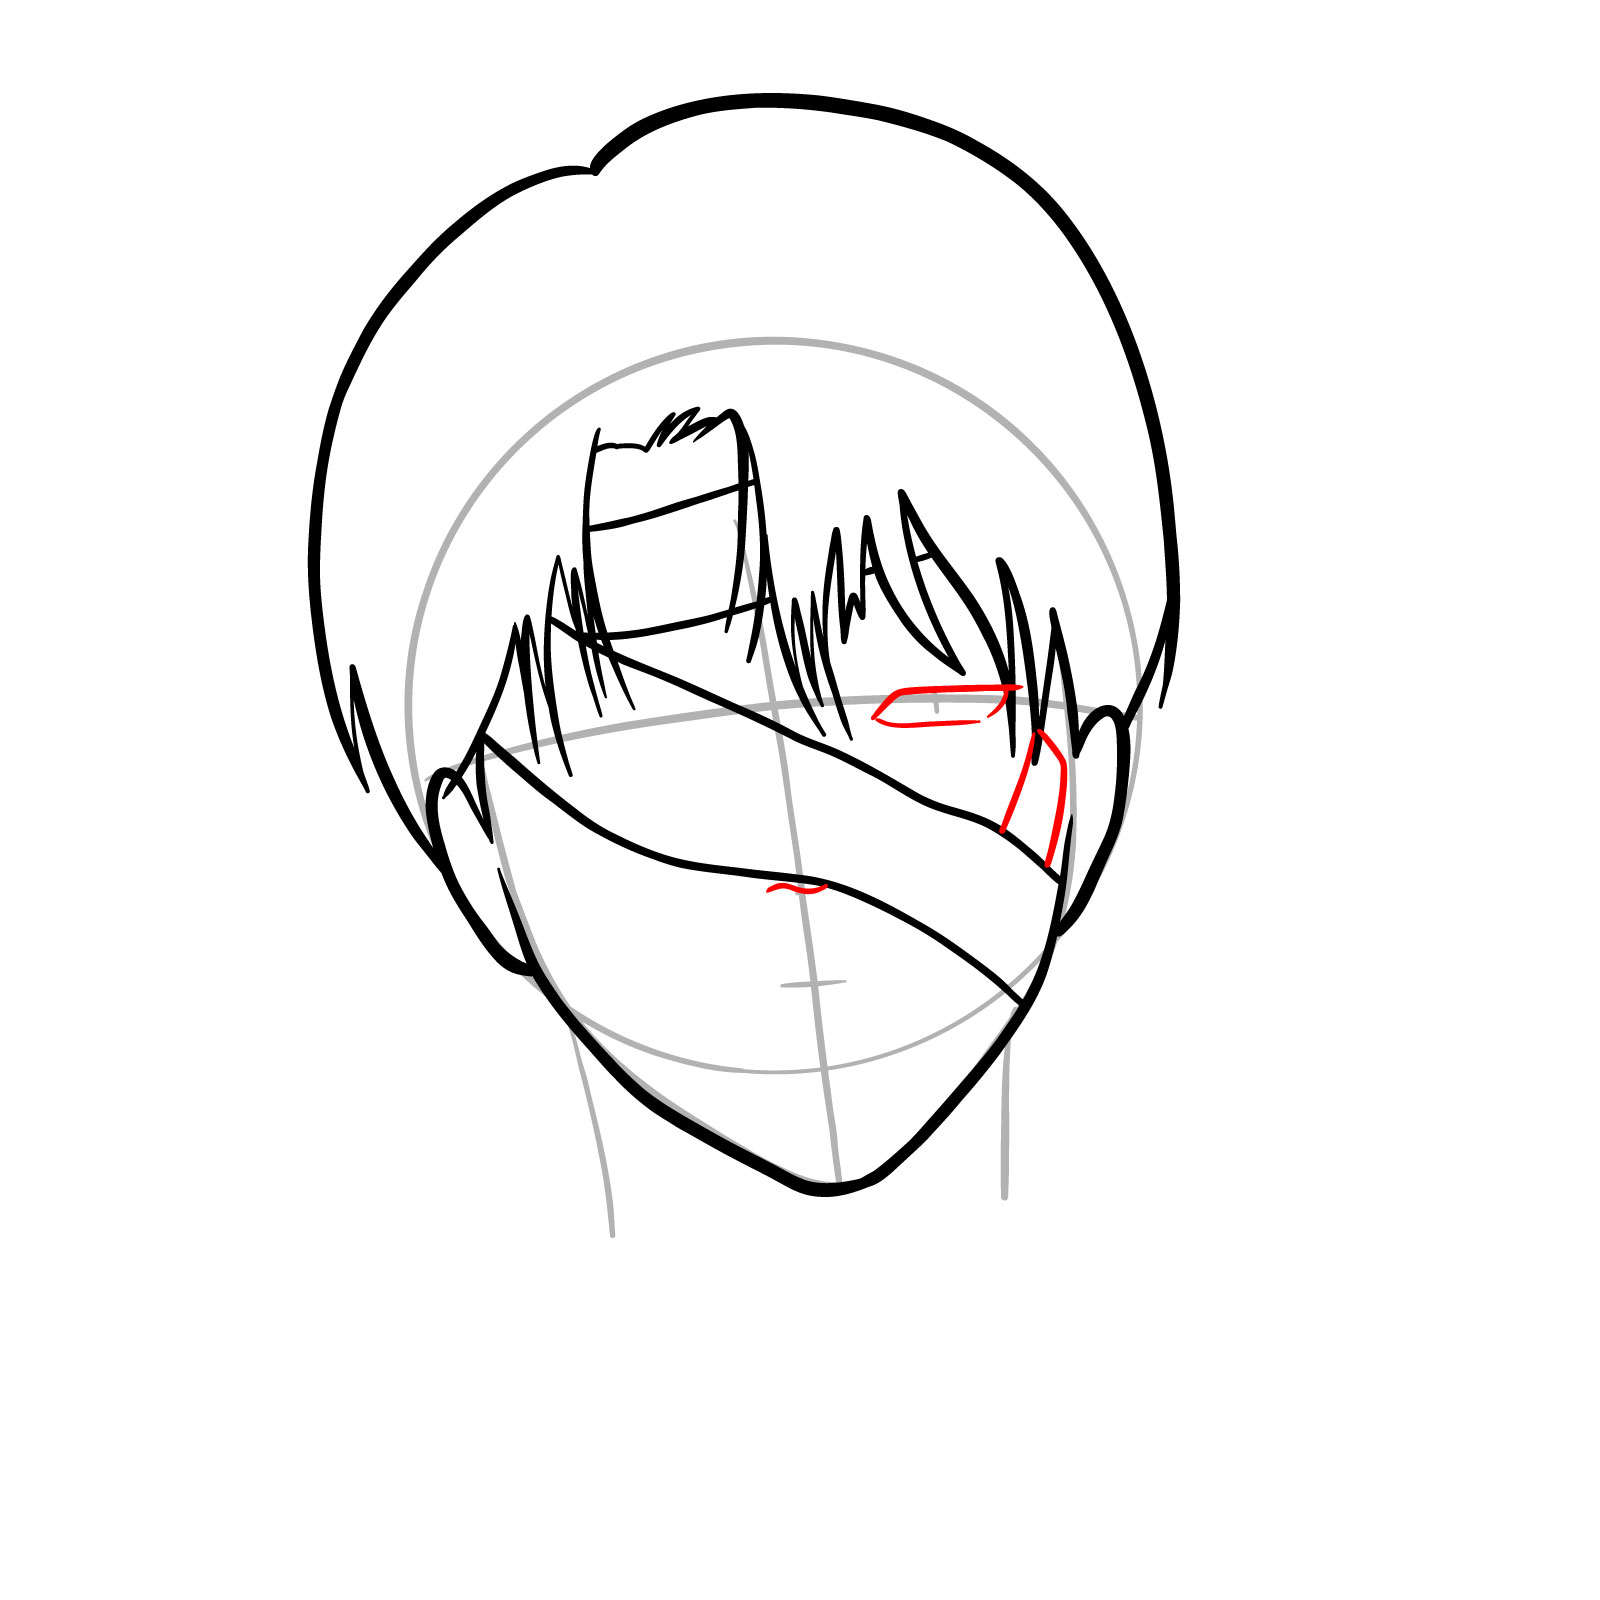 Levi Ackerman's face drawing guide showing the outline of the left eye and nose - step 09